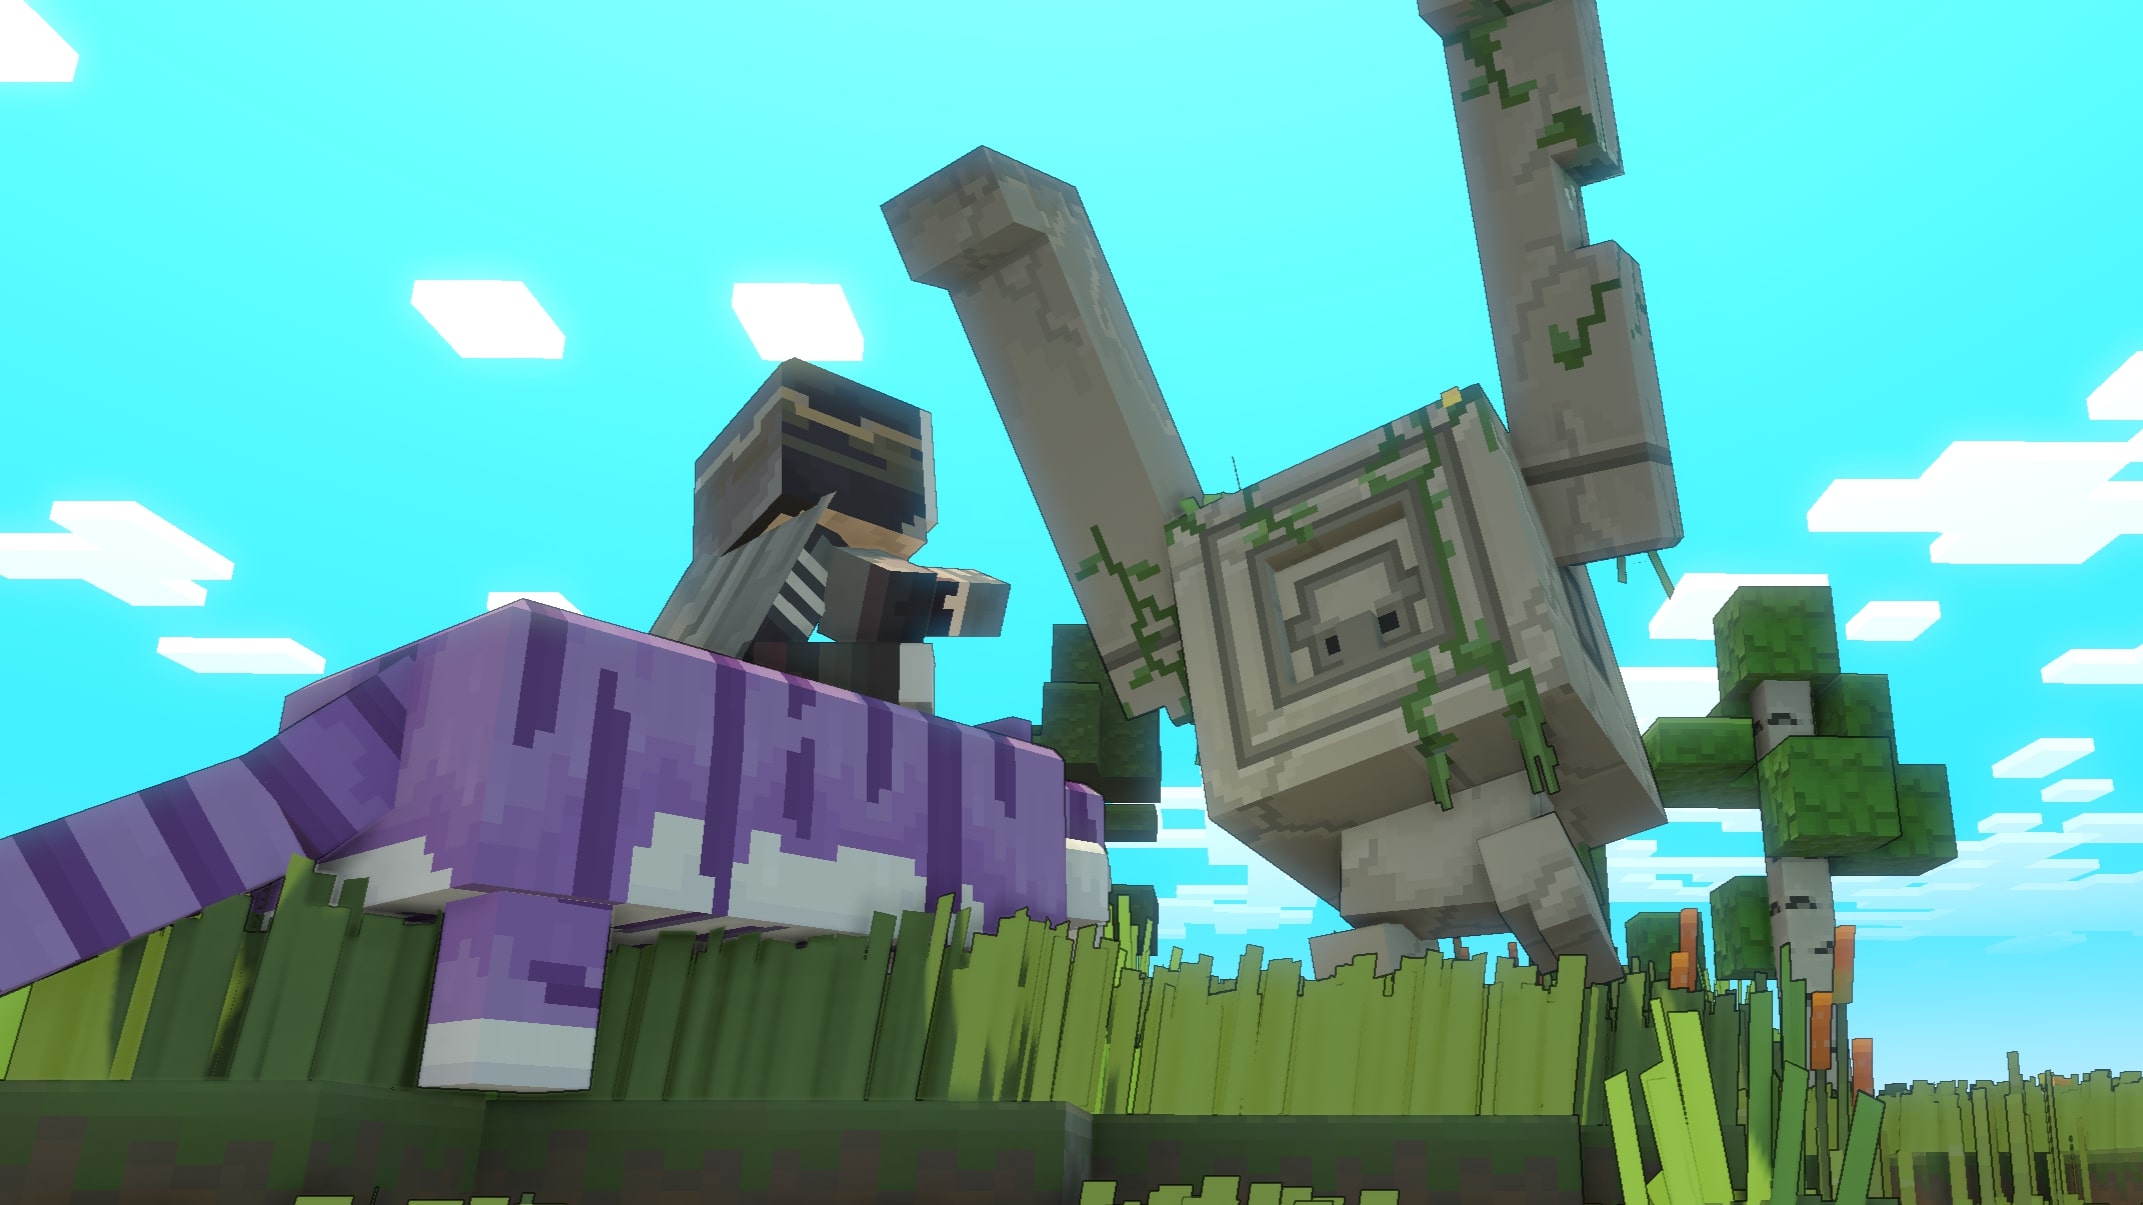 Minecraft Legends guide: How to find and use Power Towers